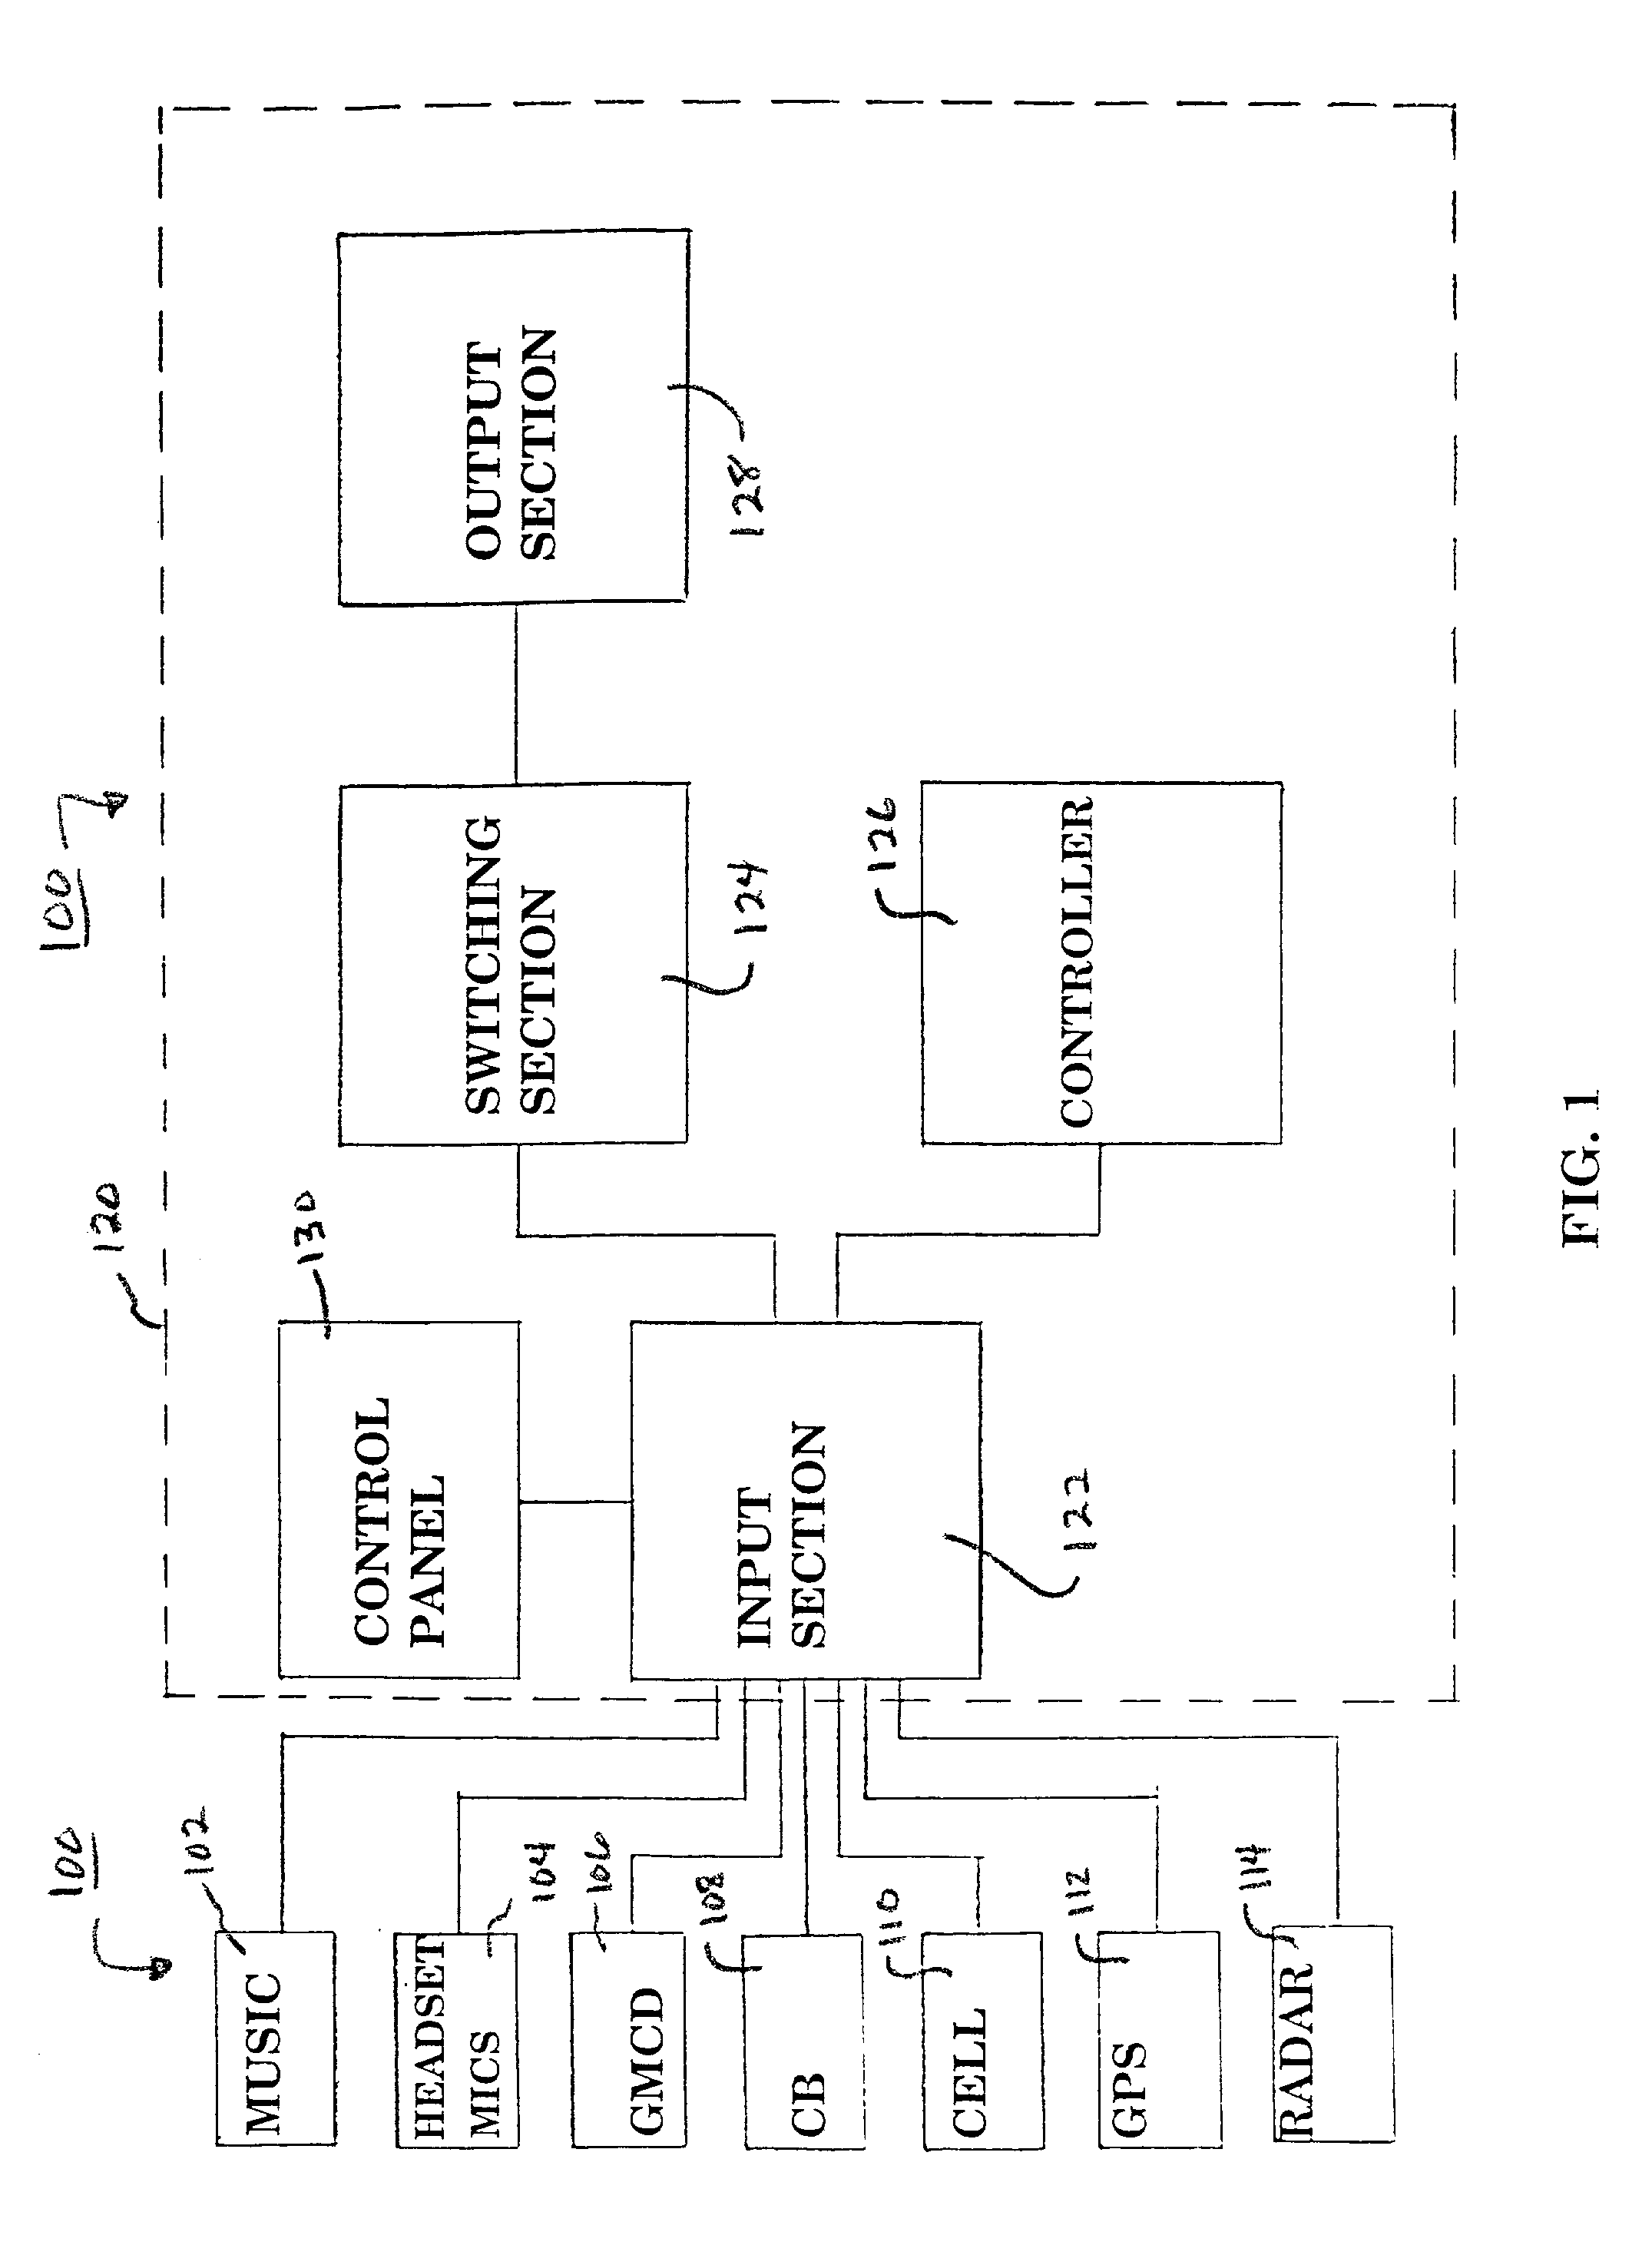 Multi-accessory vehicle audio system, switch and method